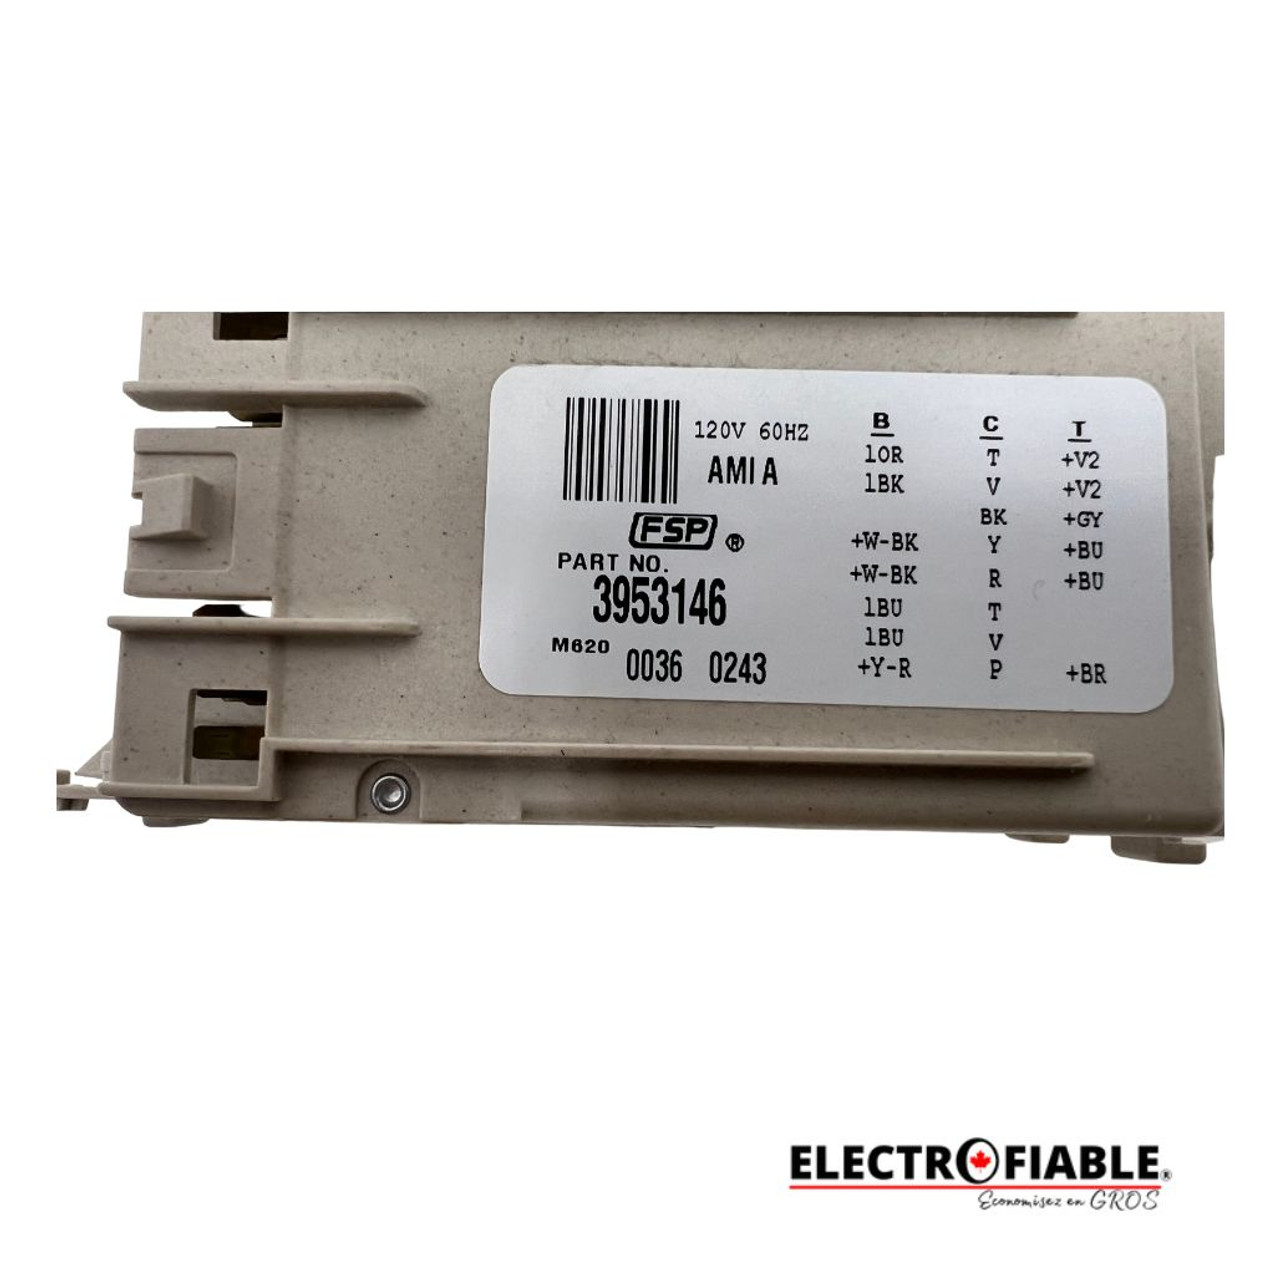 3953146 Timer for Whirlpool washer